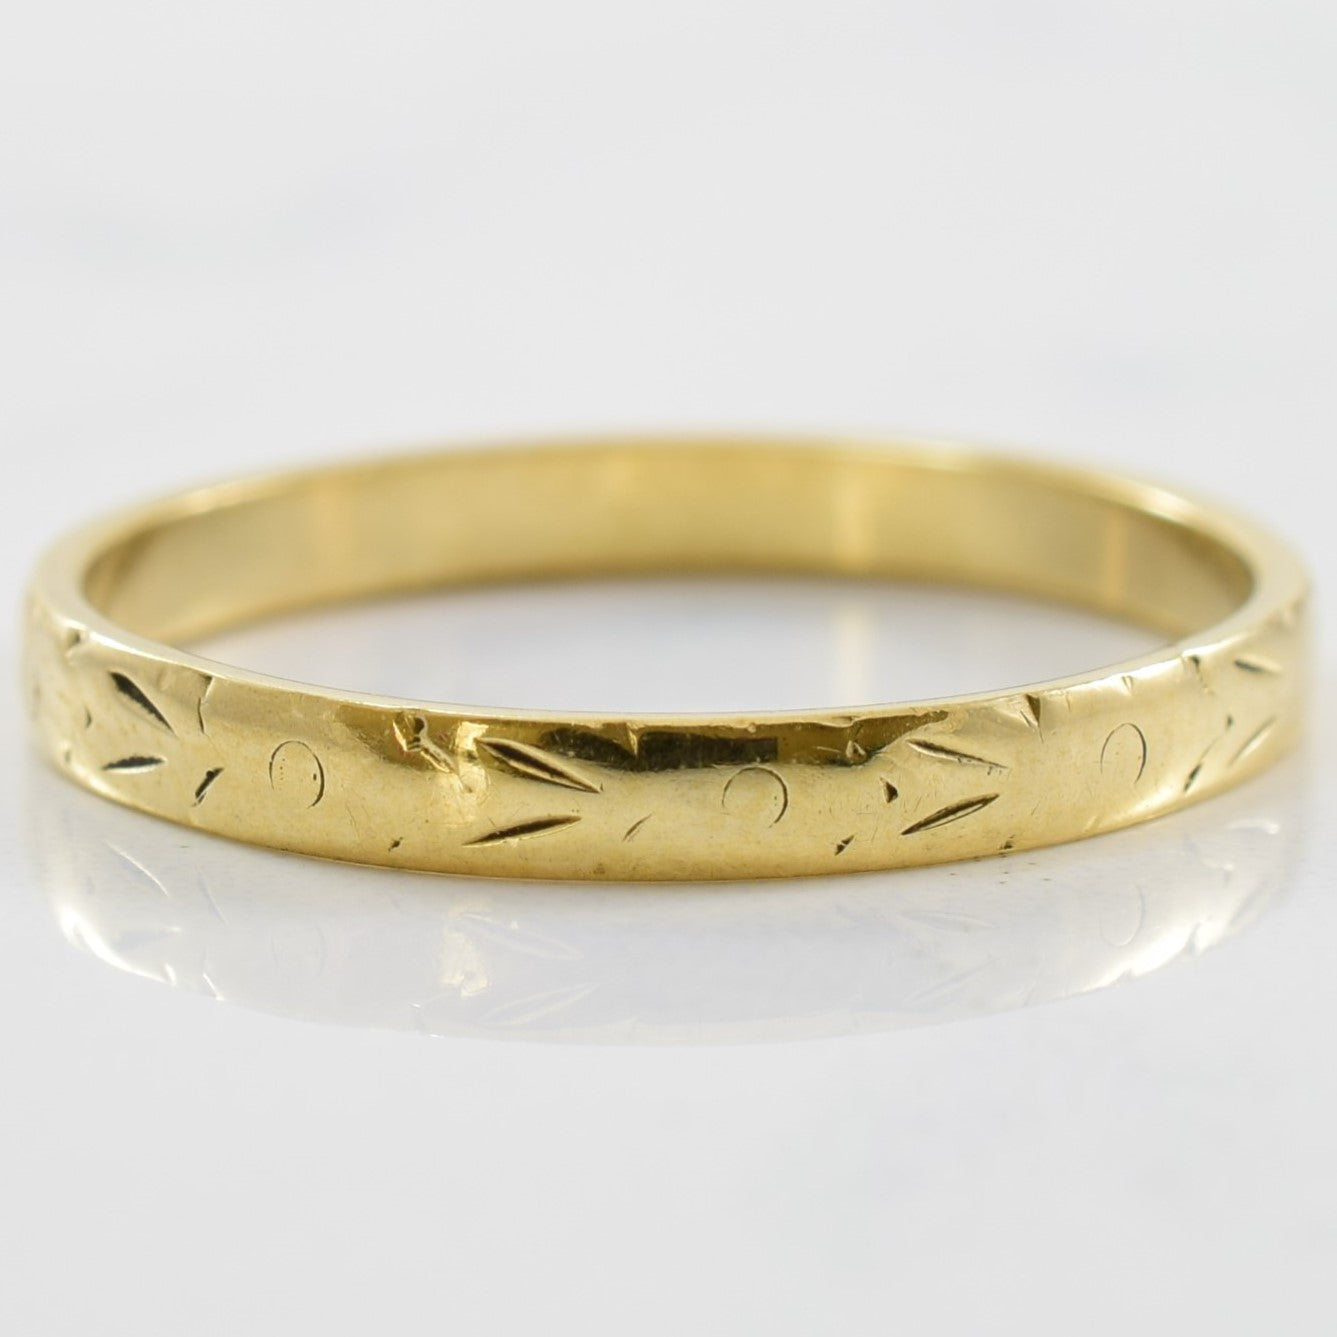 1980s Floral Patterned Gold Band | SZ 6 |